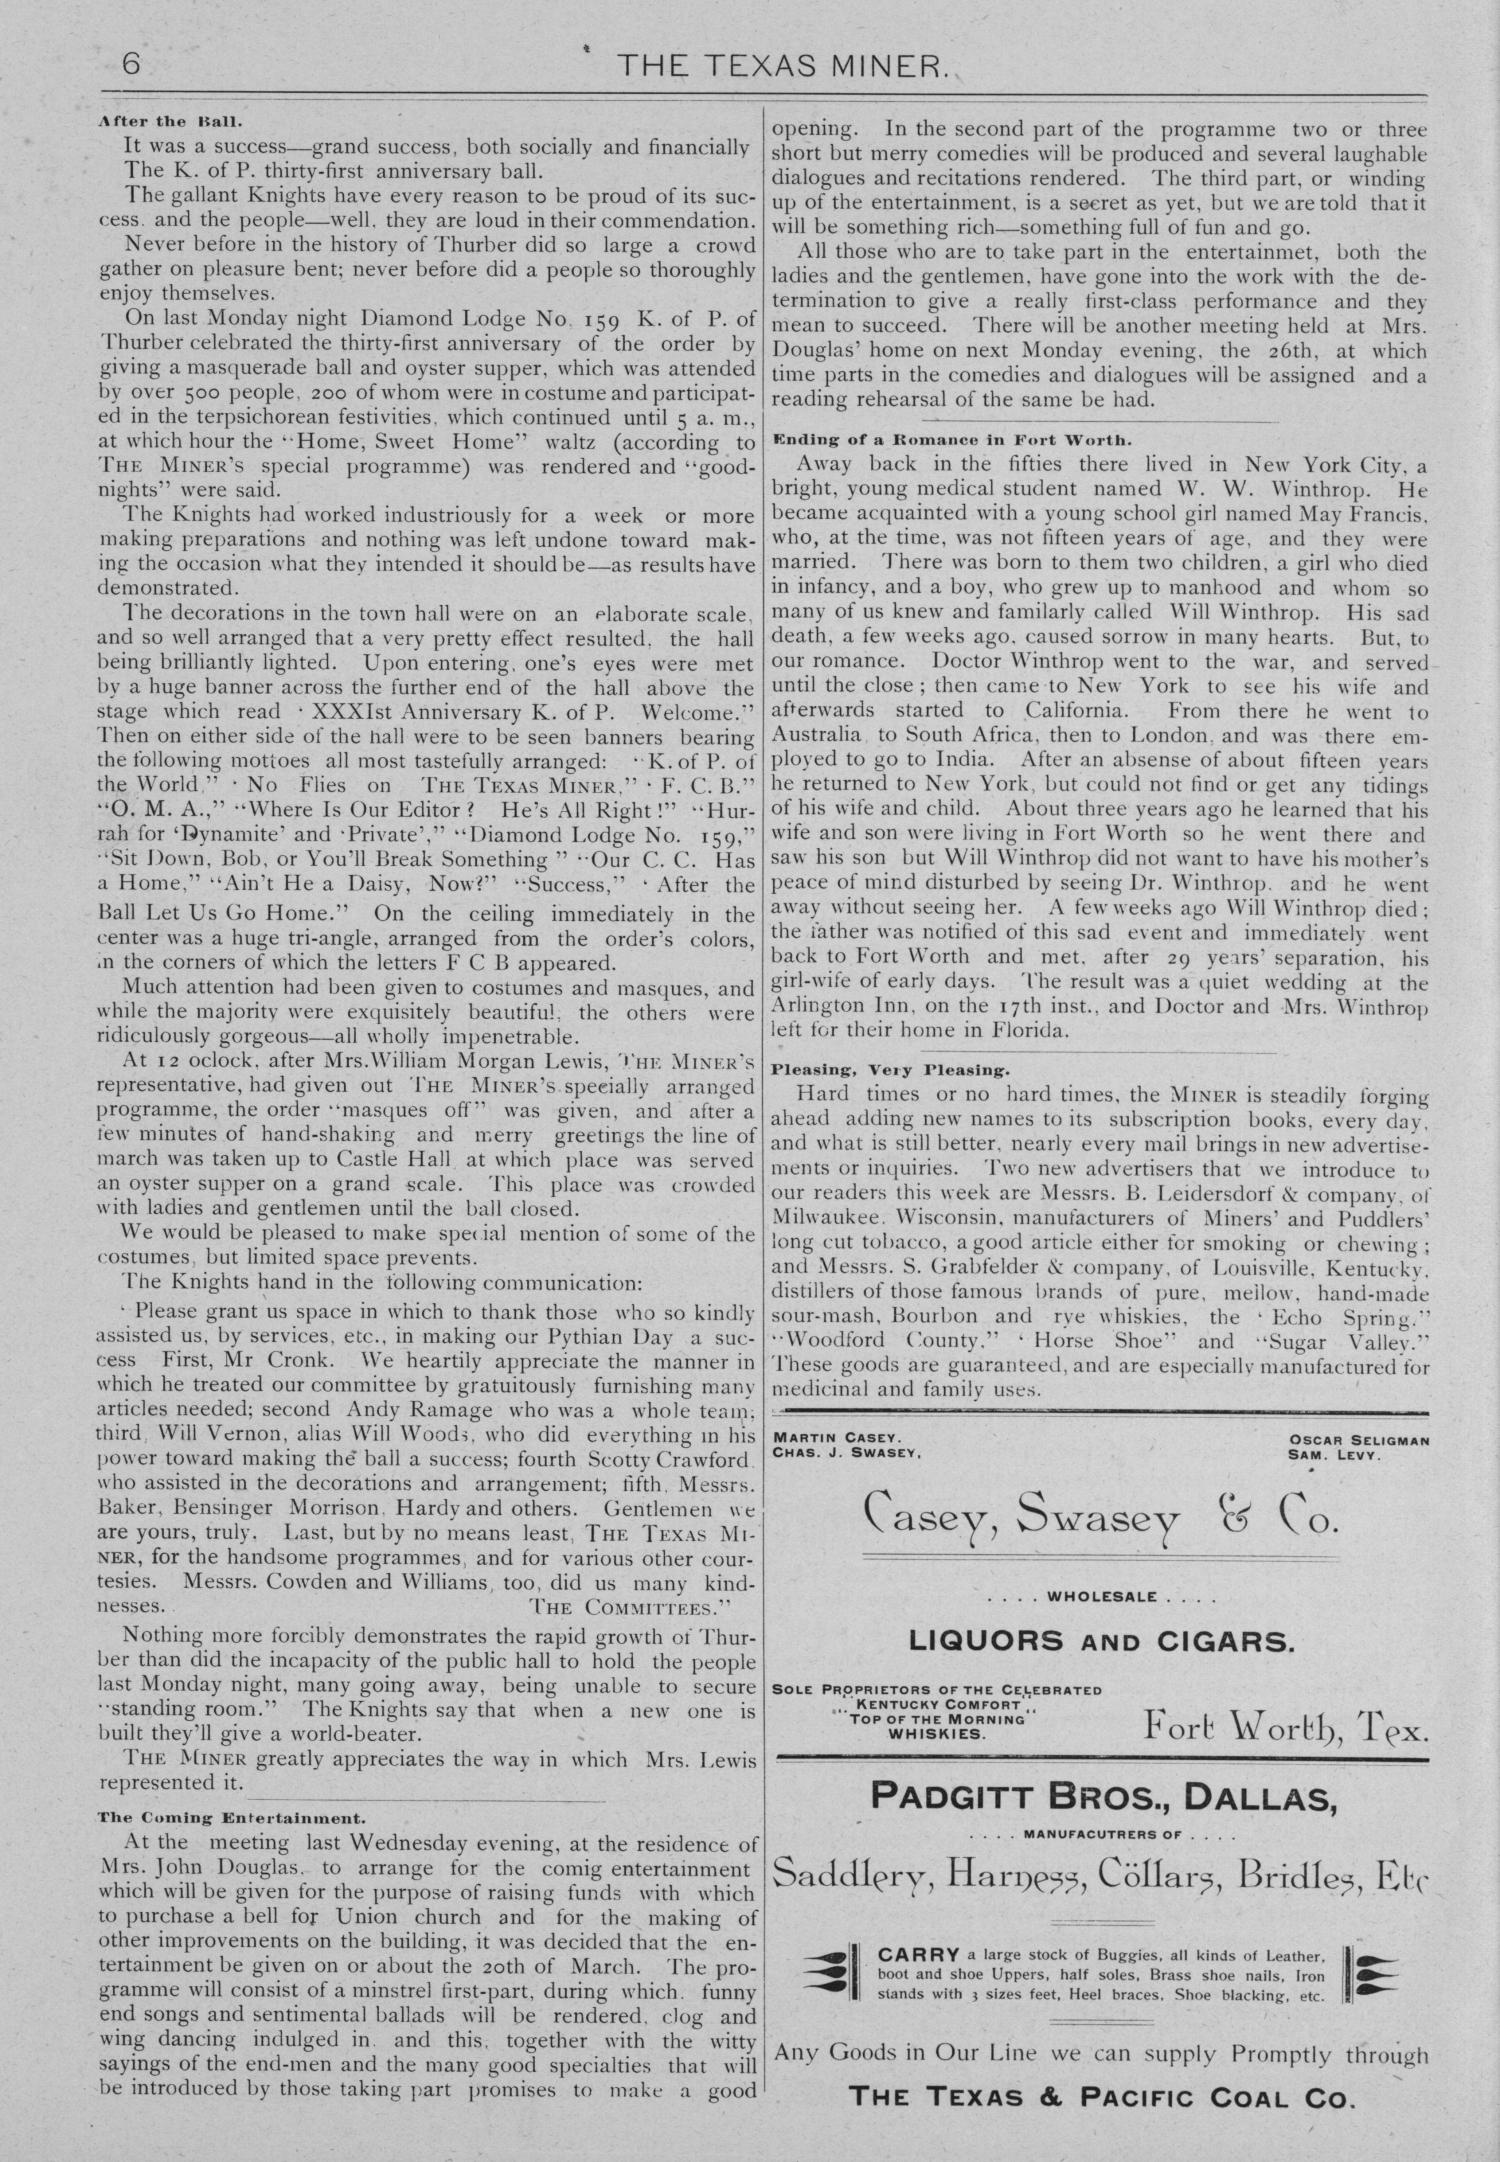 The Texas Miner, Volume 1, Number 6, February 24, 1894
                                                
                                                    6
                                                